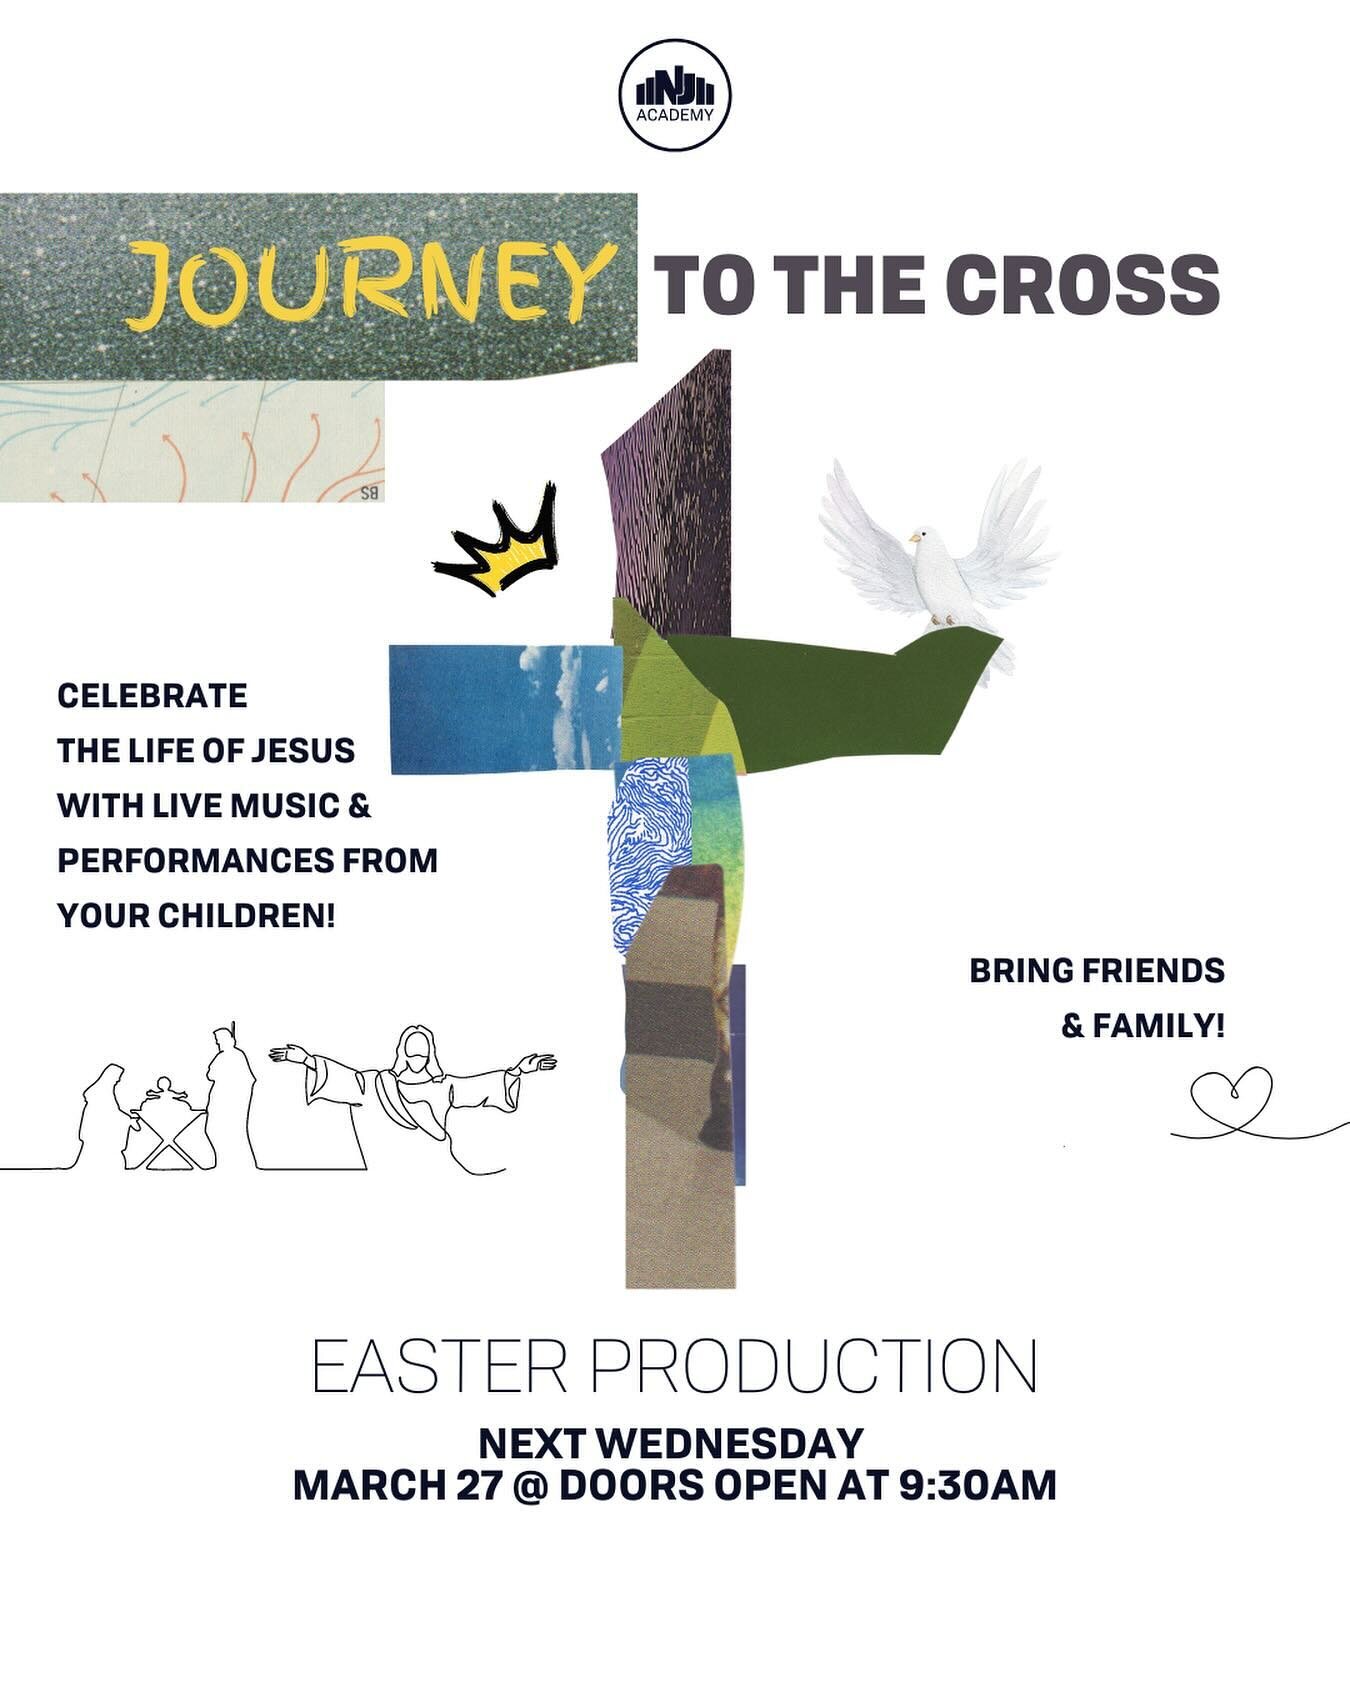 Next Wednesday our students will be showcasing an incredible Live Easter production! Journey To The Cross beautifully tells the story of Jesus through live music &amp; performances. Doors open at 9:30am, bring your friends &amp; family!